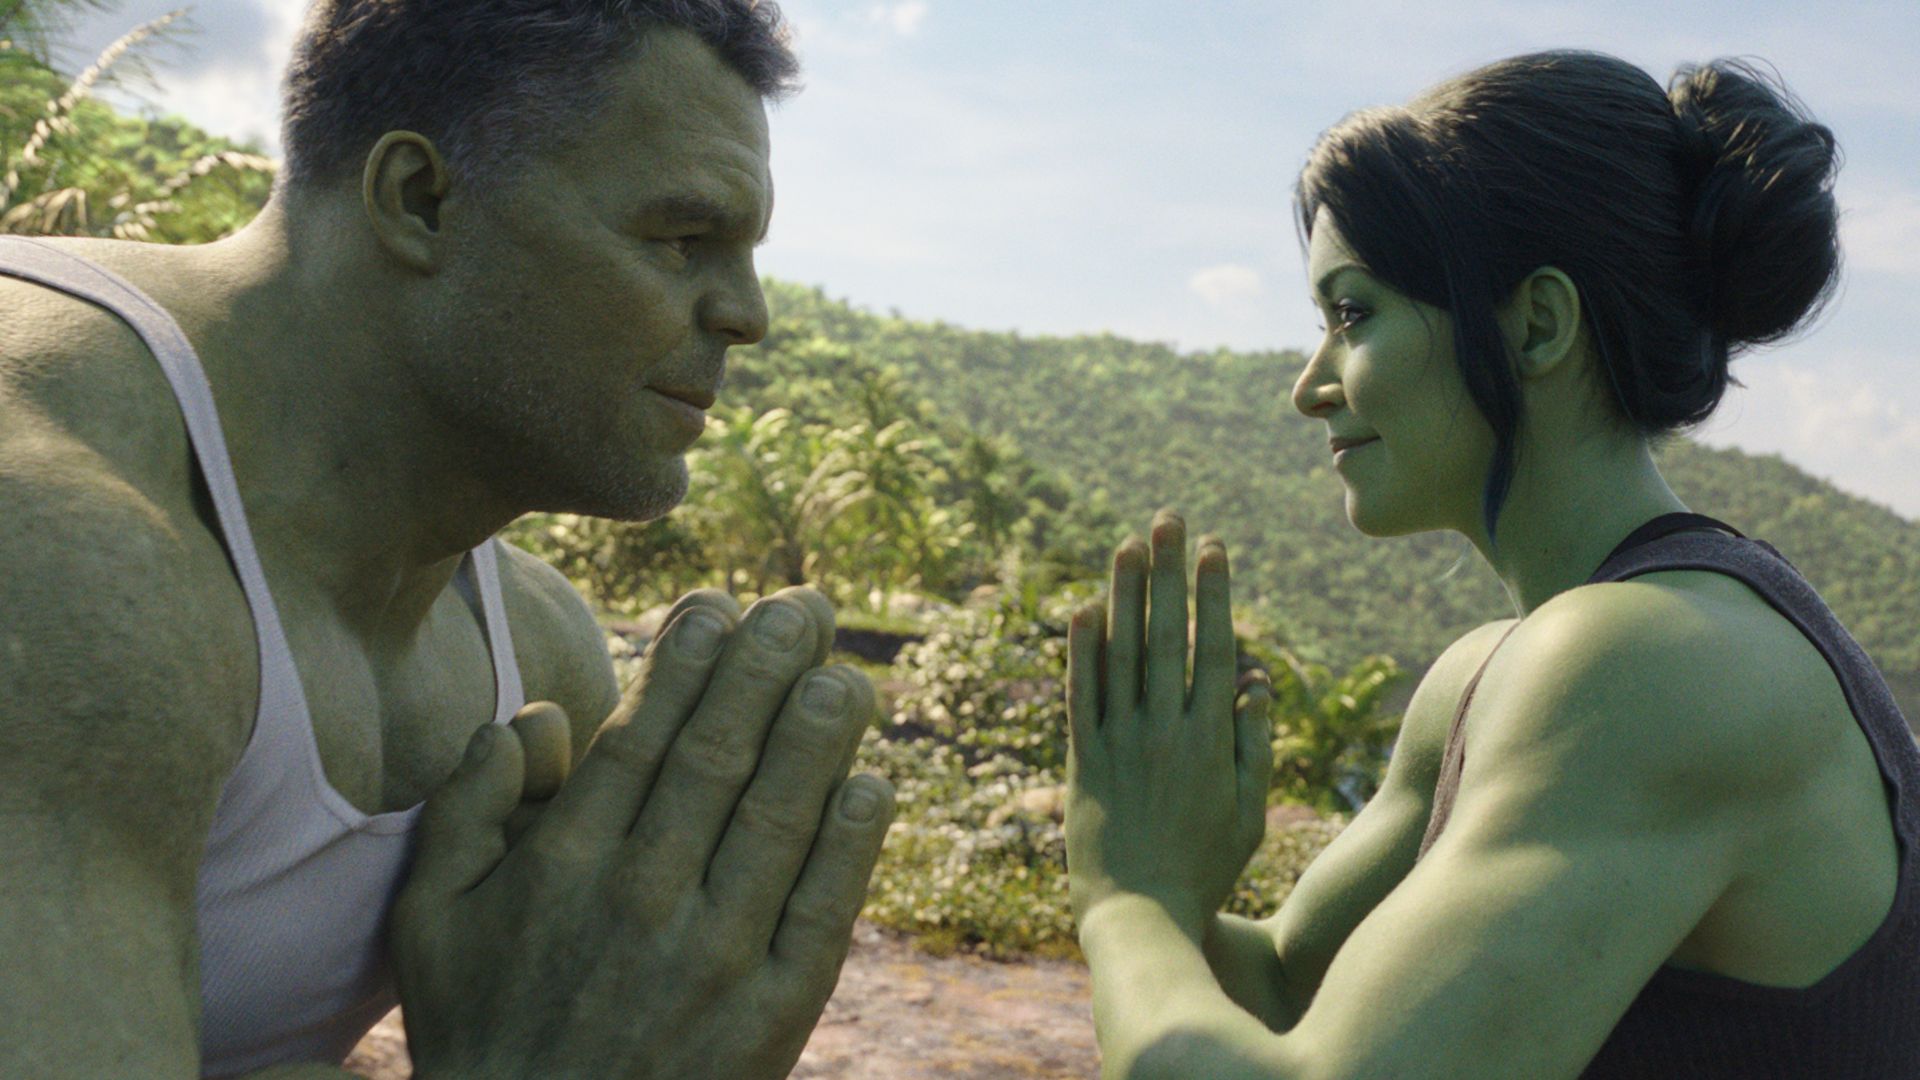 She-Hulk Episode 2 Sets Up a Planet Hulk Solo Movie – The